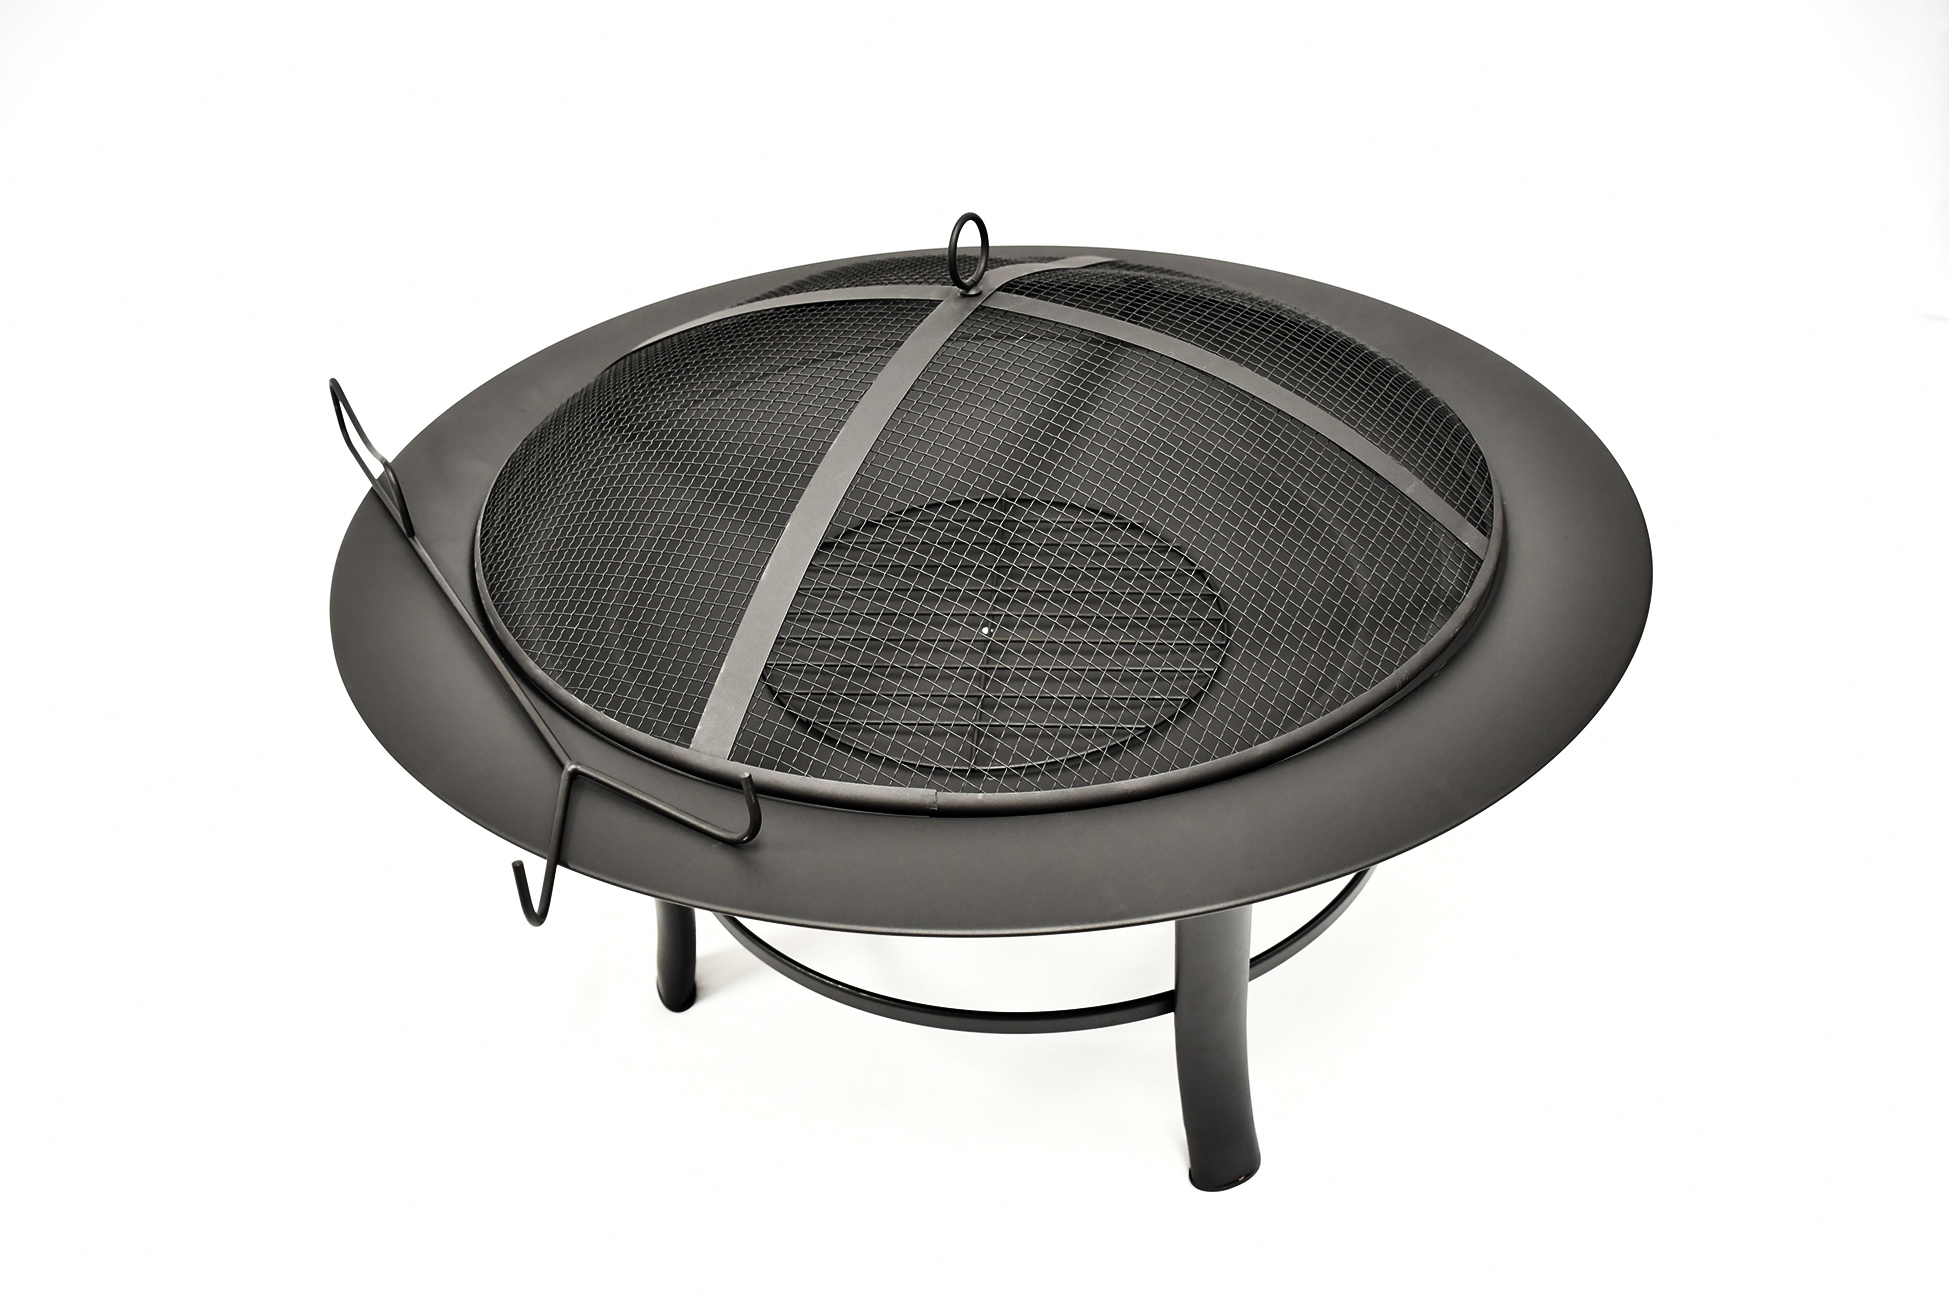 Mainstays 28" Fire Pit with PVC Cover and Spark Guard - image 3 of 11